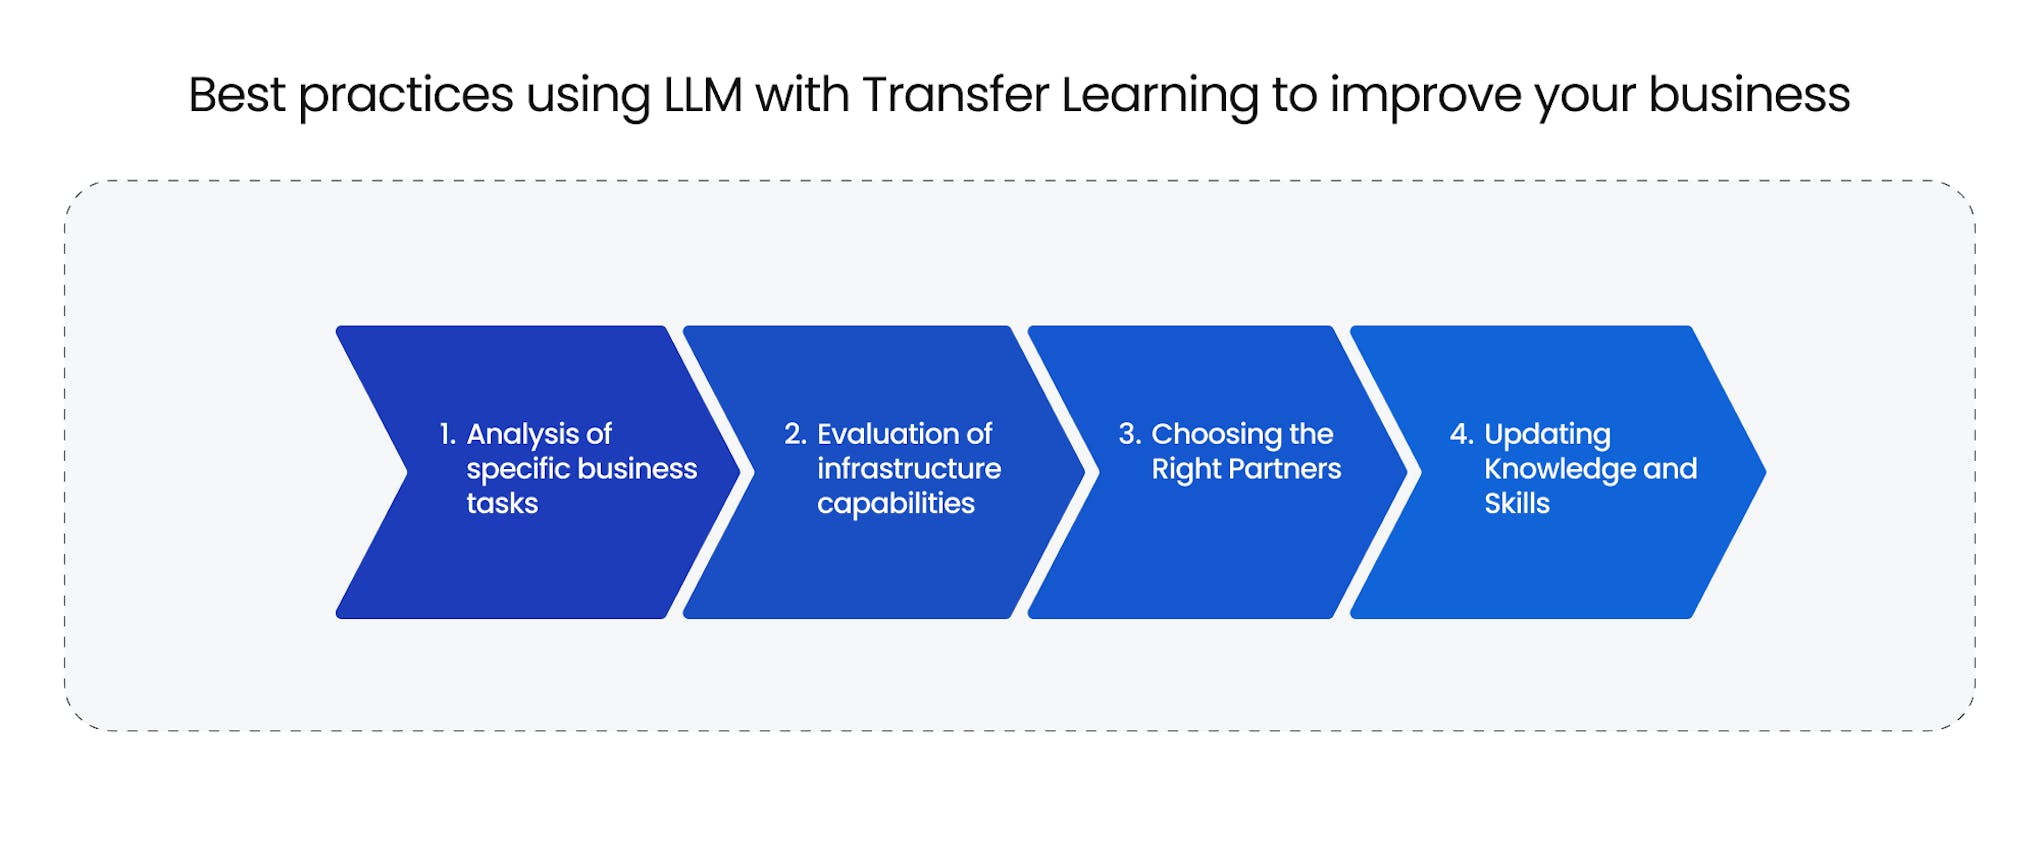 Best practices using LLM with Transfer Learning to improve your business